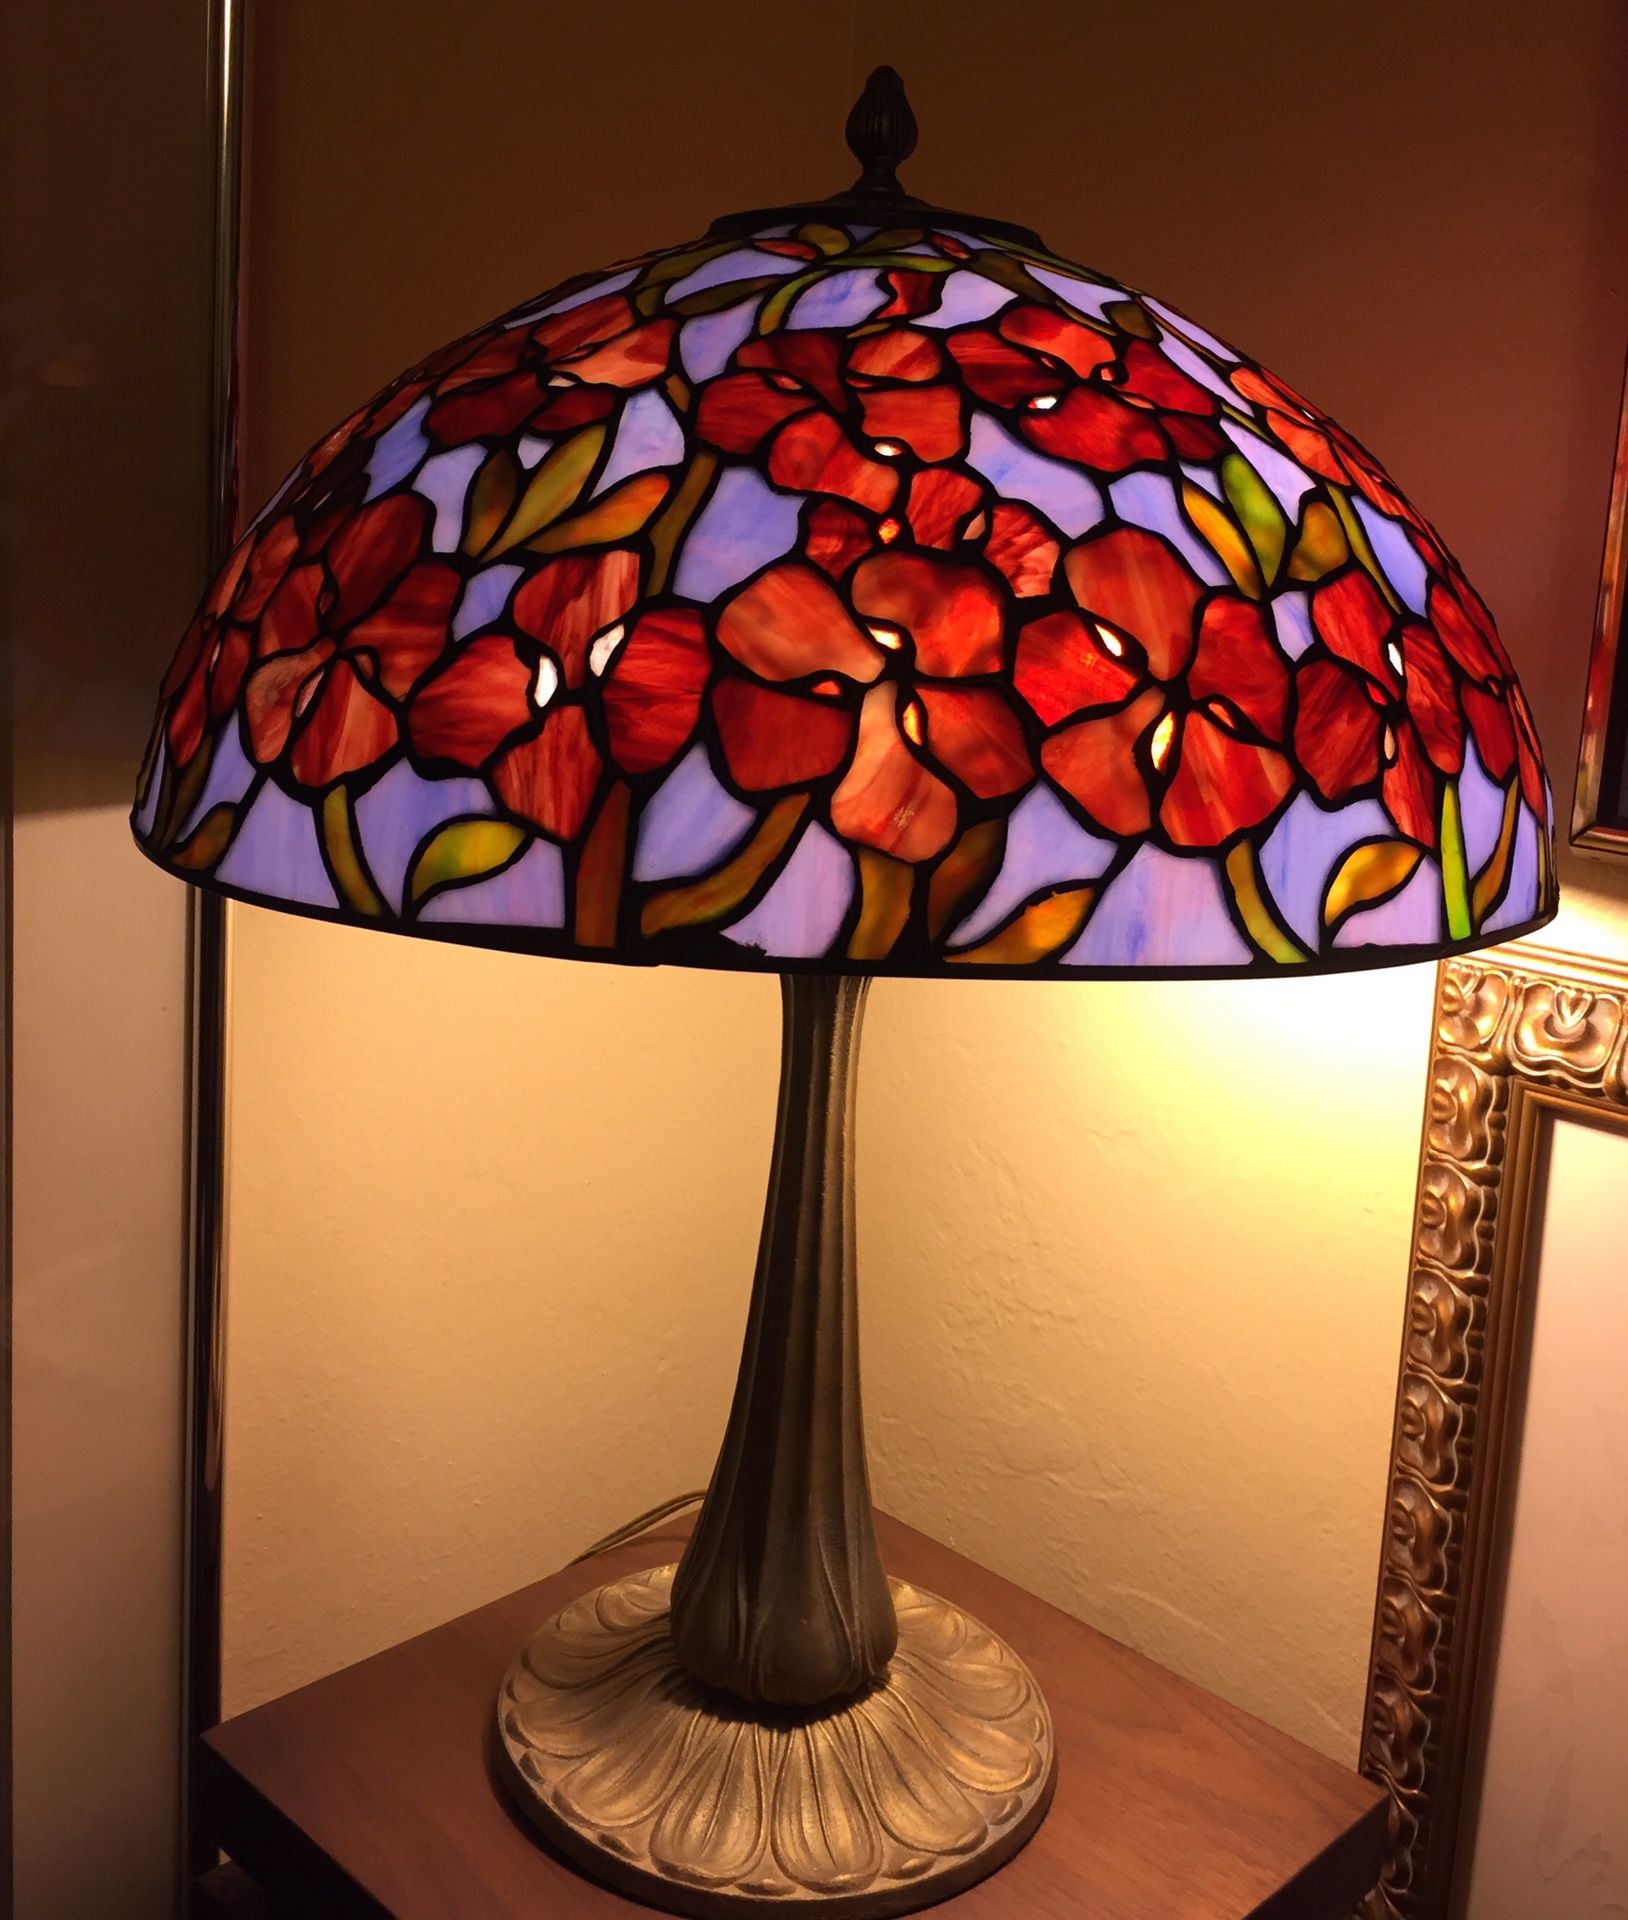 Antique stained glass Tiffany style table lamp. Please check my other items